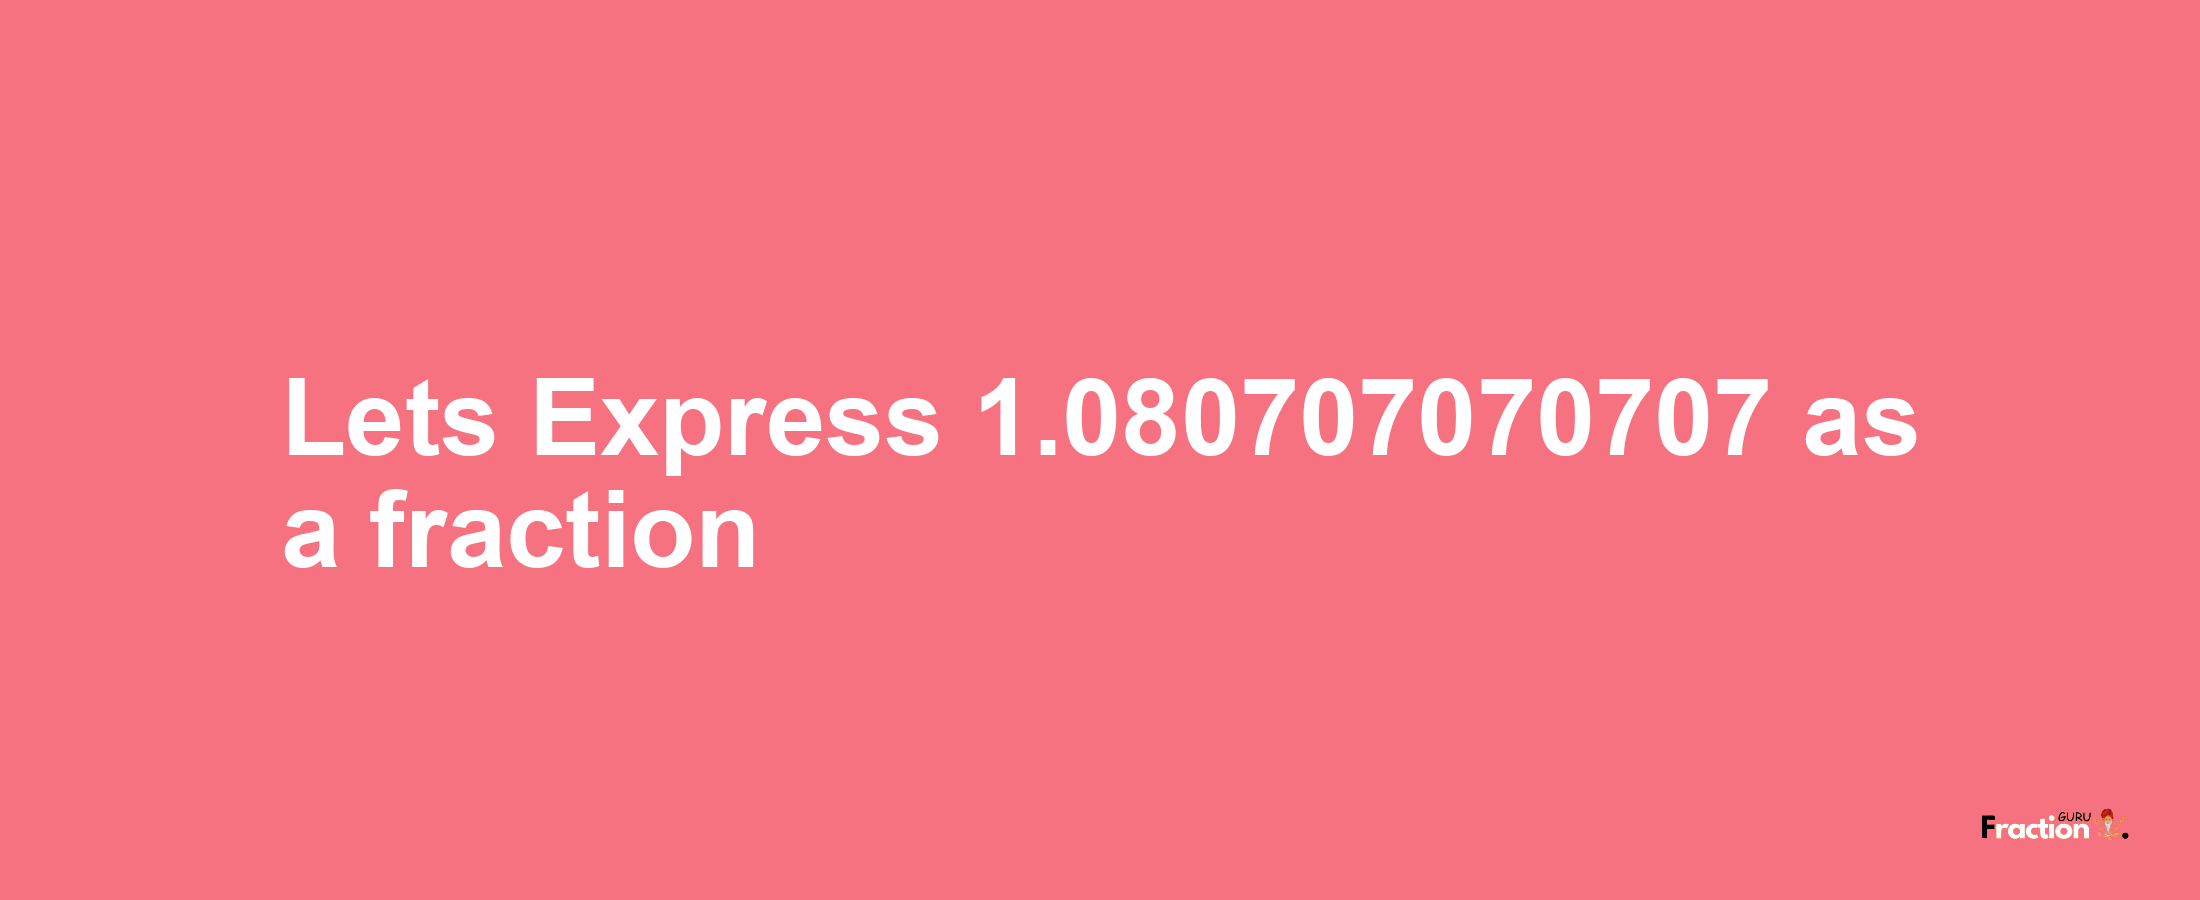 Lets Express 1.080707070707 as afraction